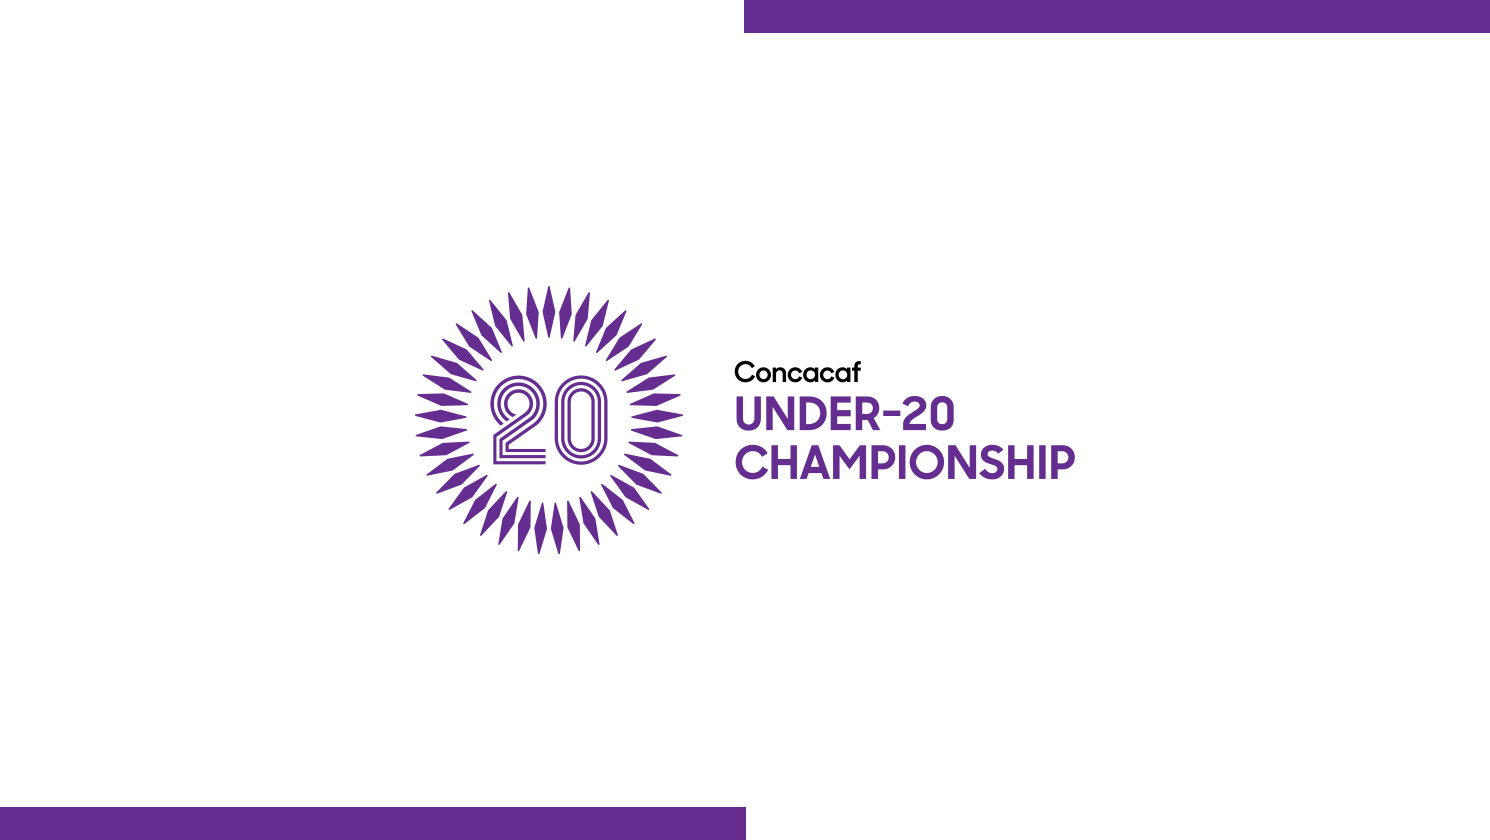 Clarifying the Complex Implications of the CONCACAF U-20 Championship